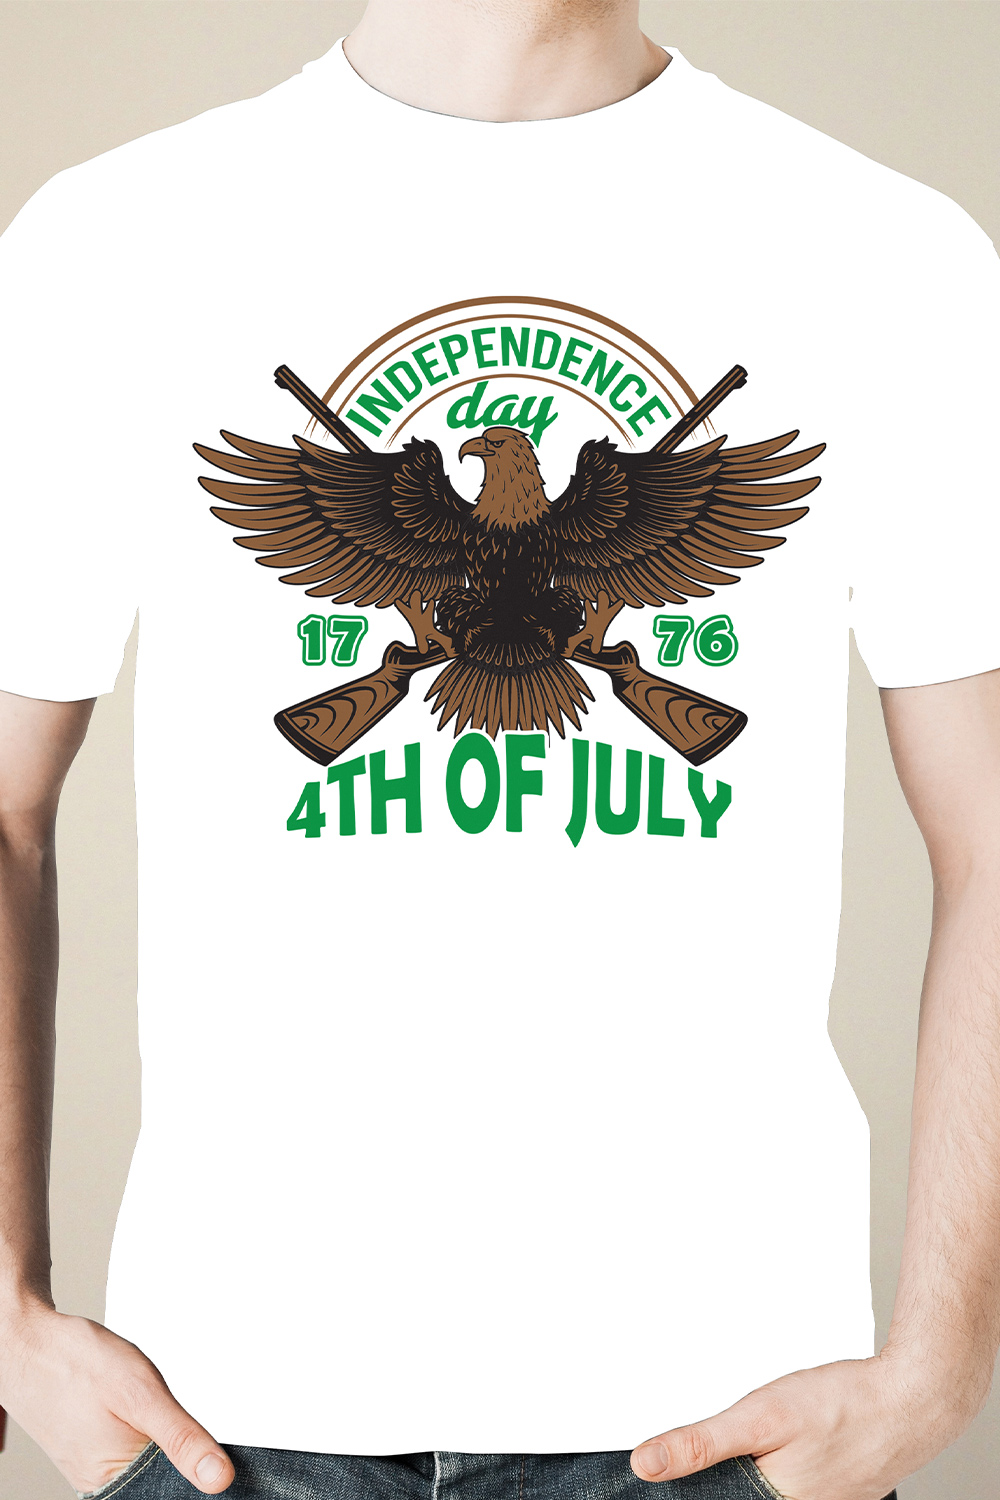 4th july t shirt pinterest preview image.